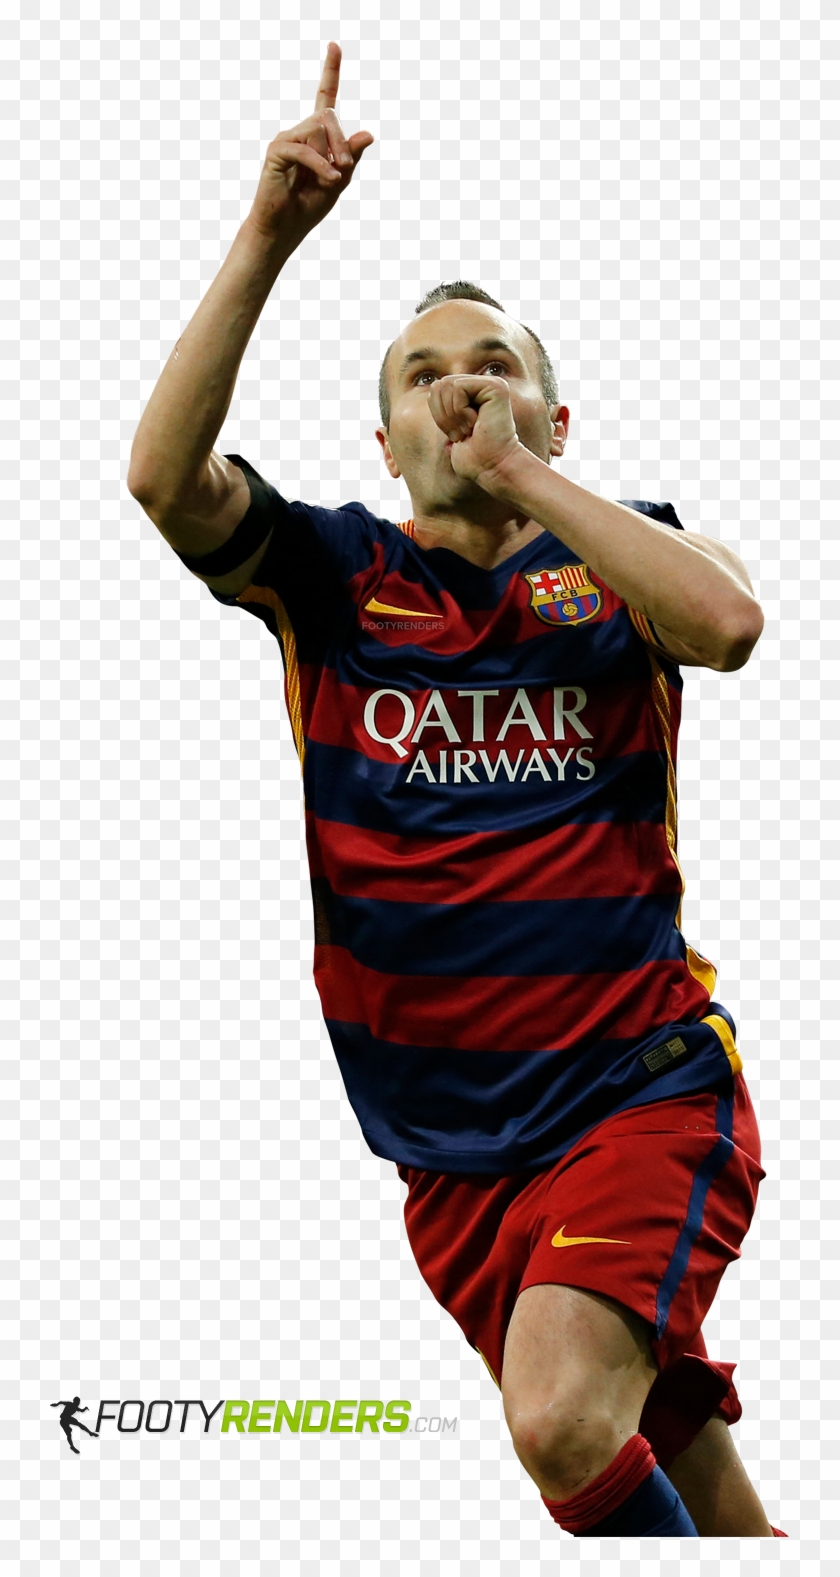 Andres Iniesta Render - Player Clipart #4740573